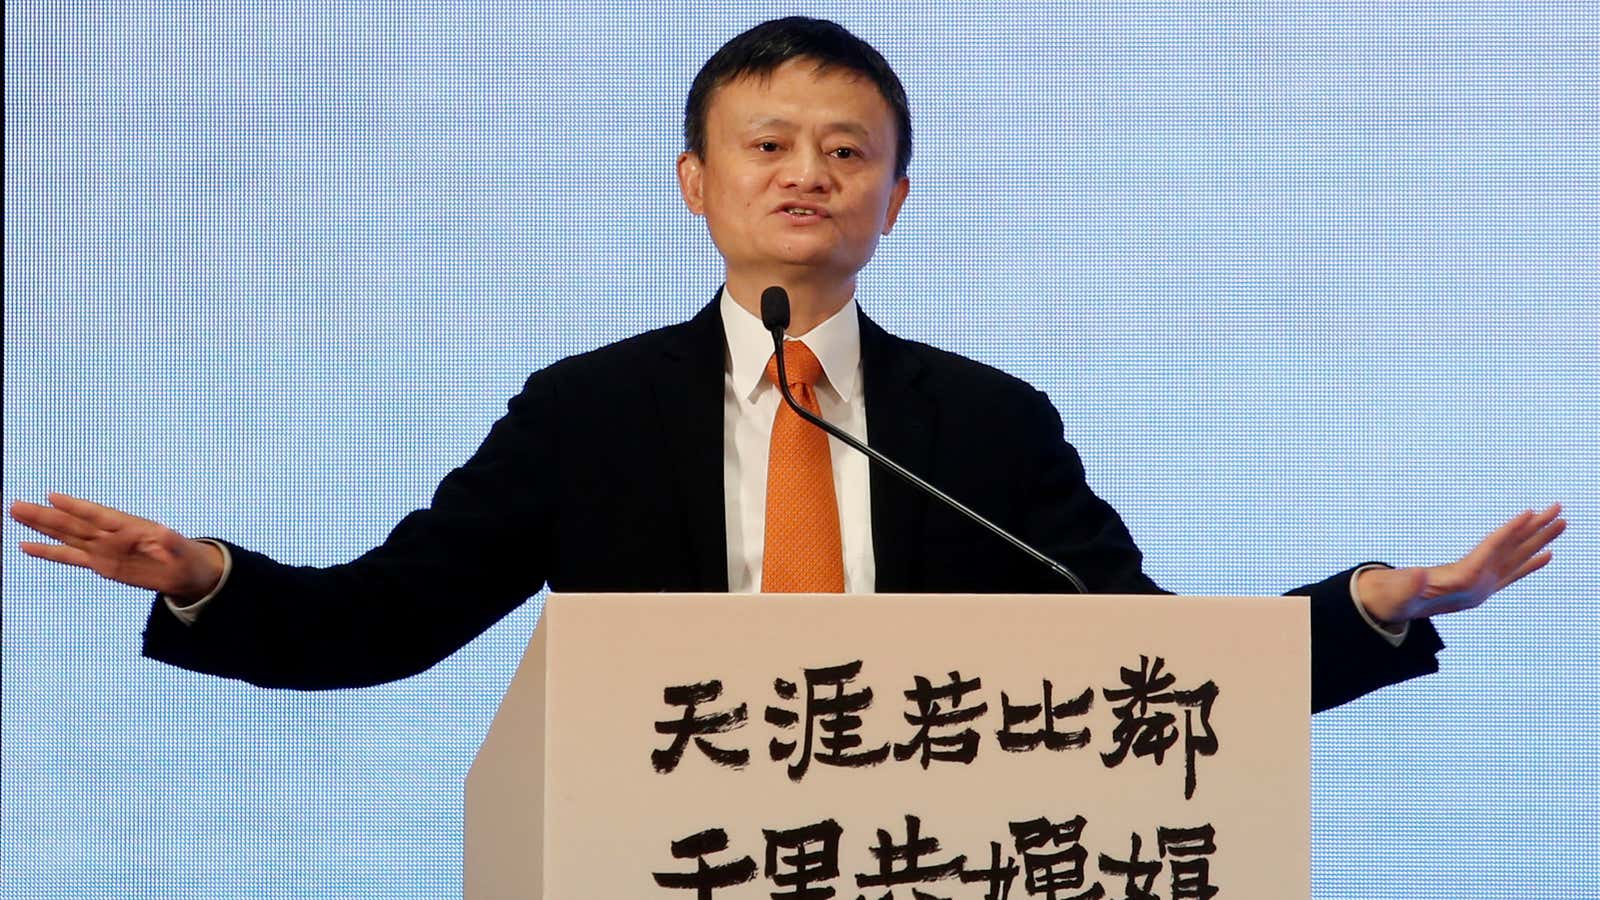 Alibaba Group co-founder and executive chairman Jack Ma speaks during a news conference in Hong Kong, China, June 25, 2018.